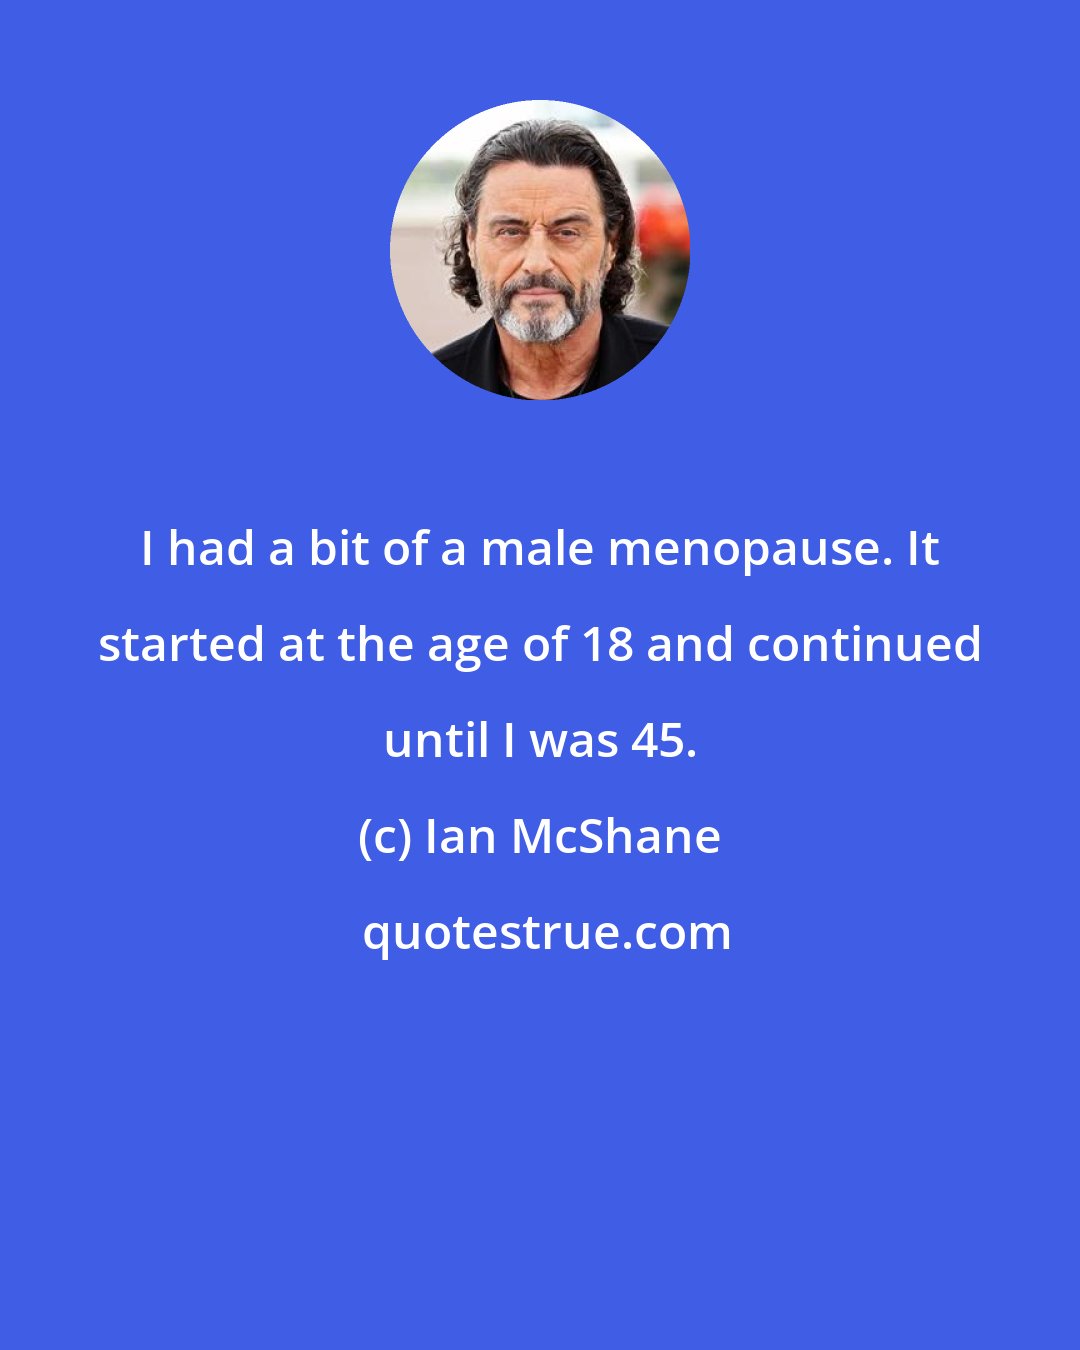 Ian McShane: I had a bit of a male menopause. It started at the age of 18 and continued until I was 45.